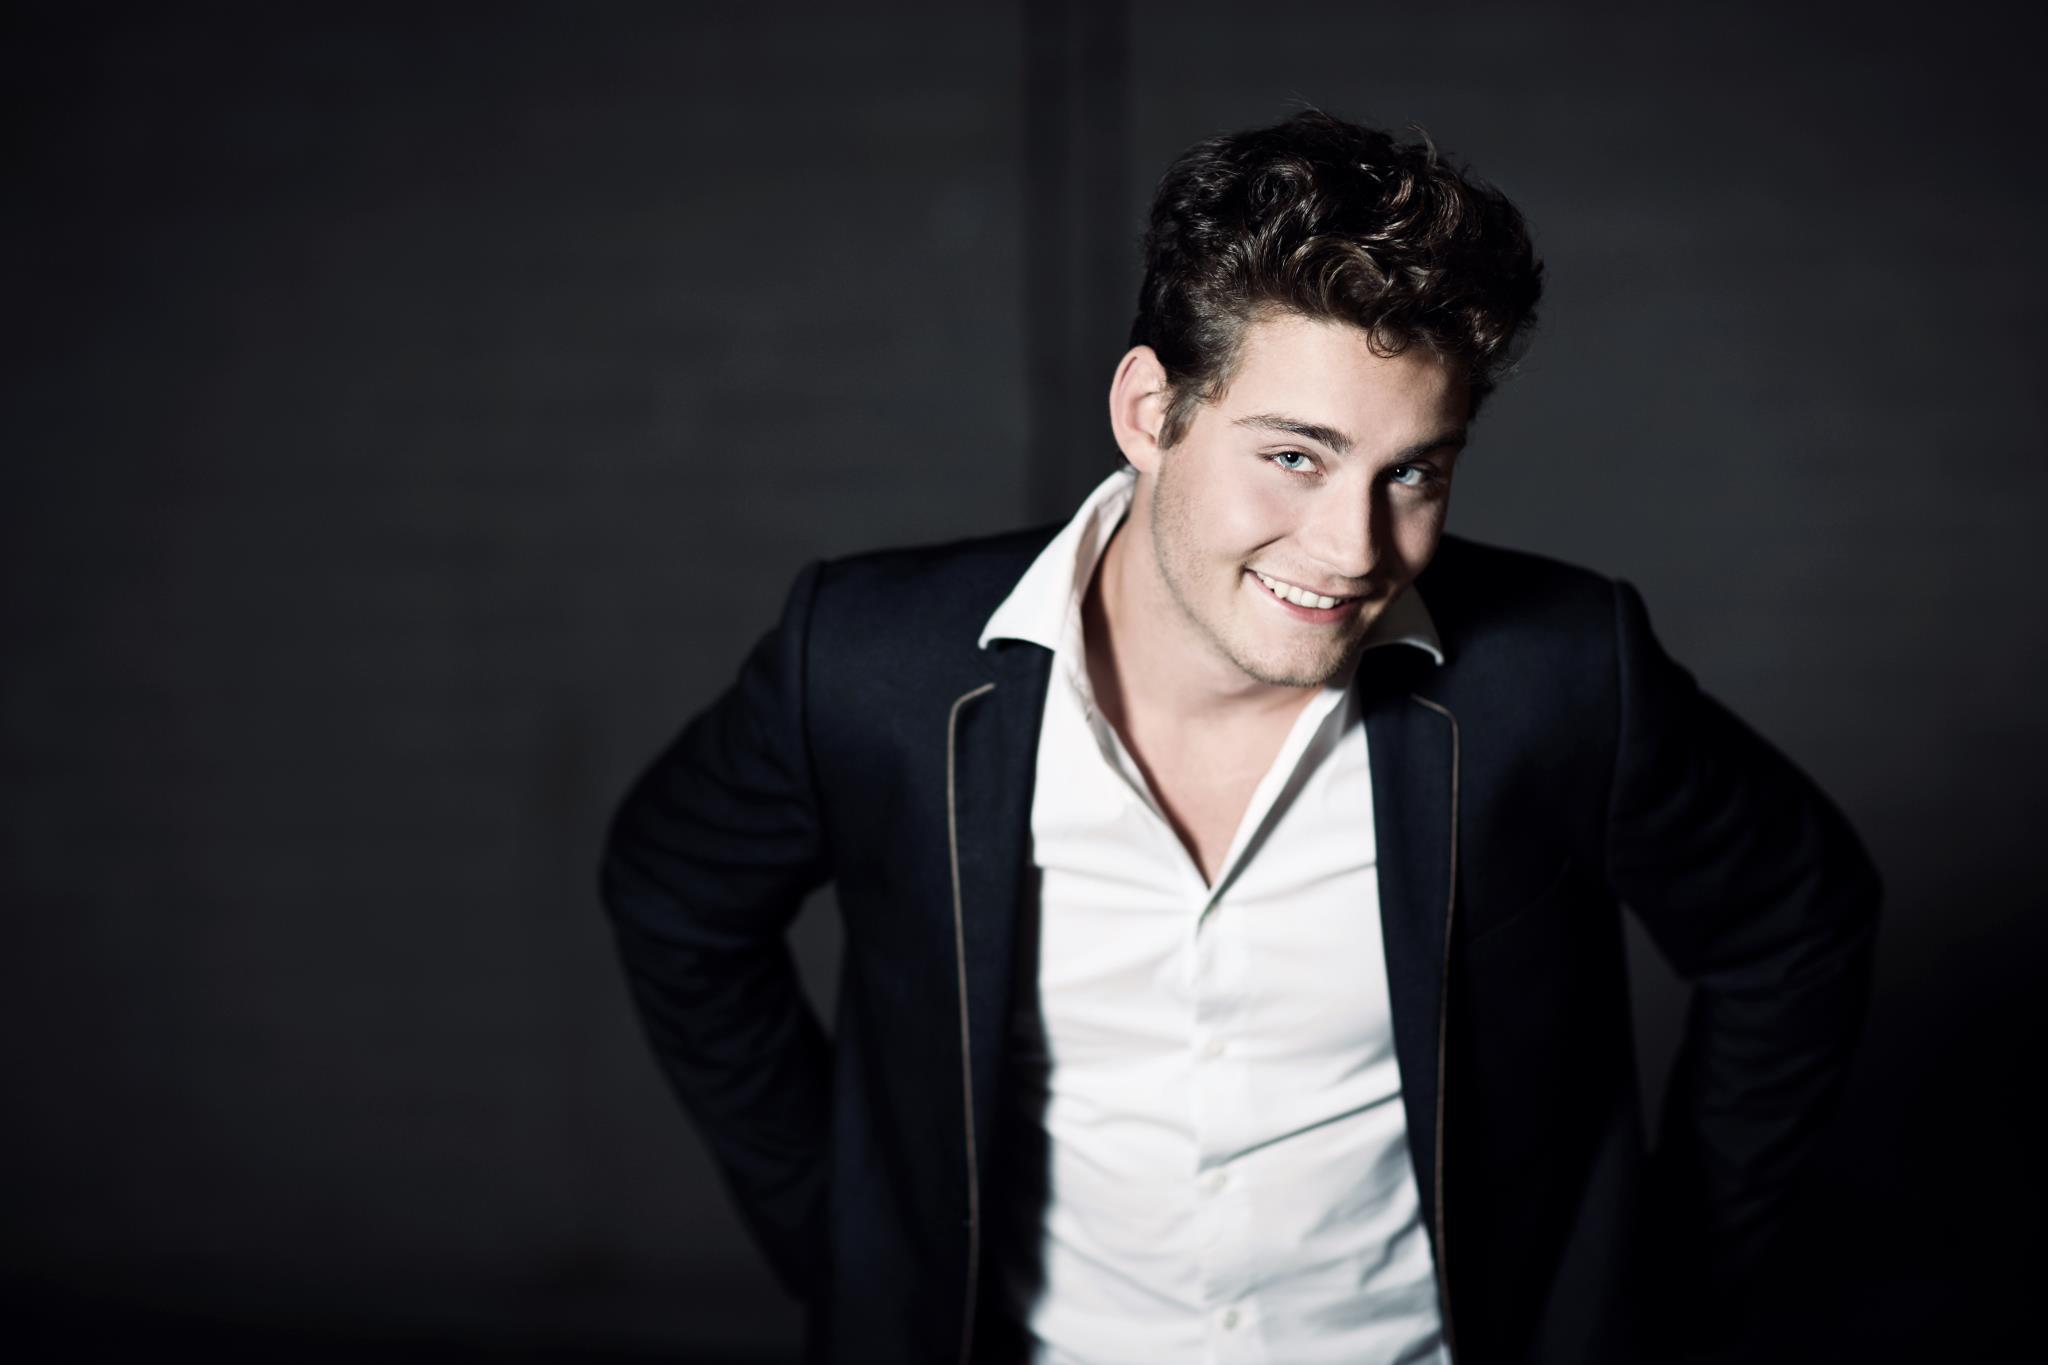 The Netherlands: Douwe Bob to present his entry on March 2nd!